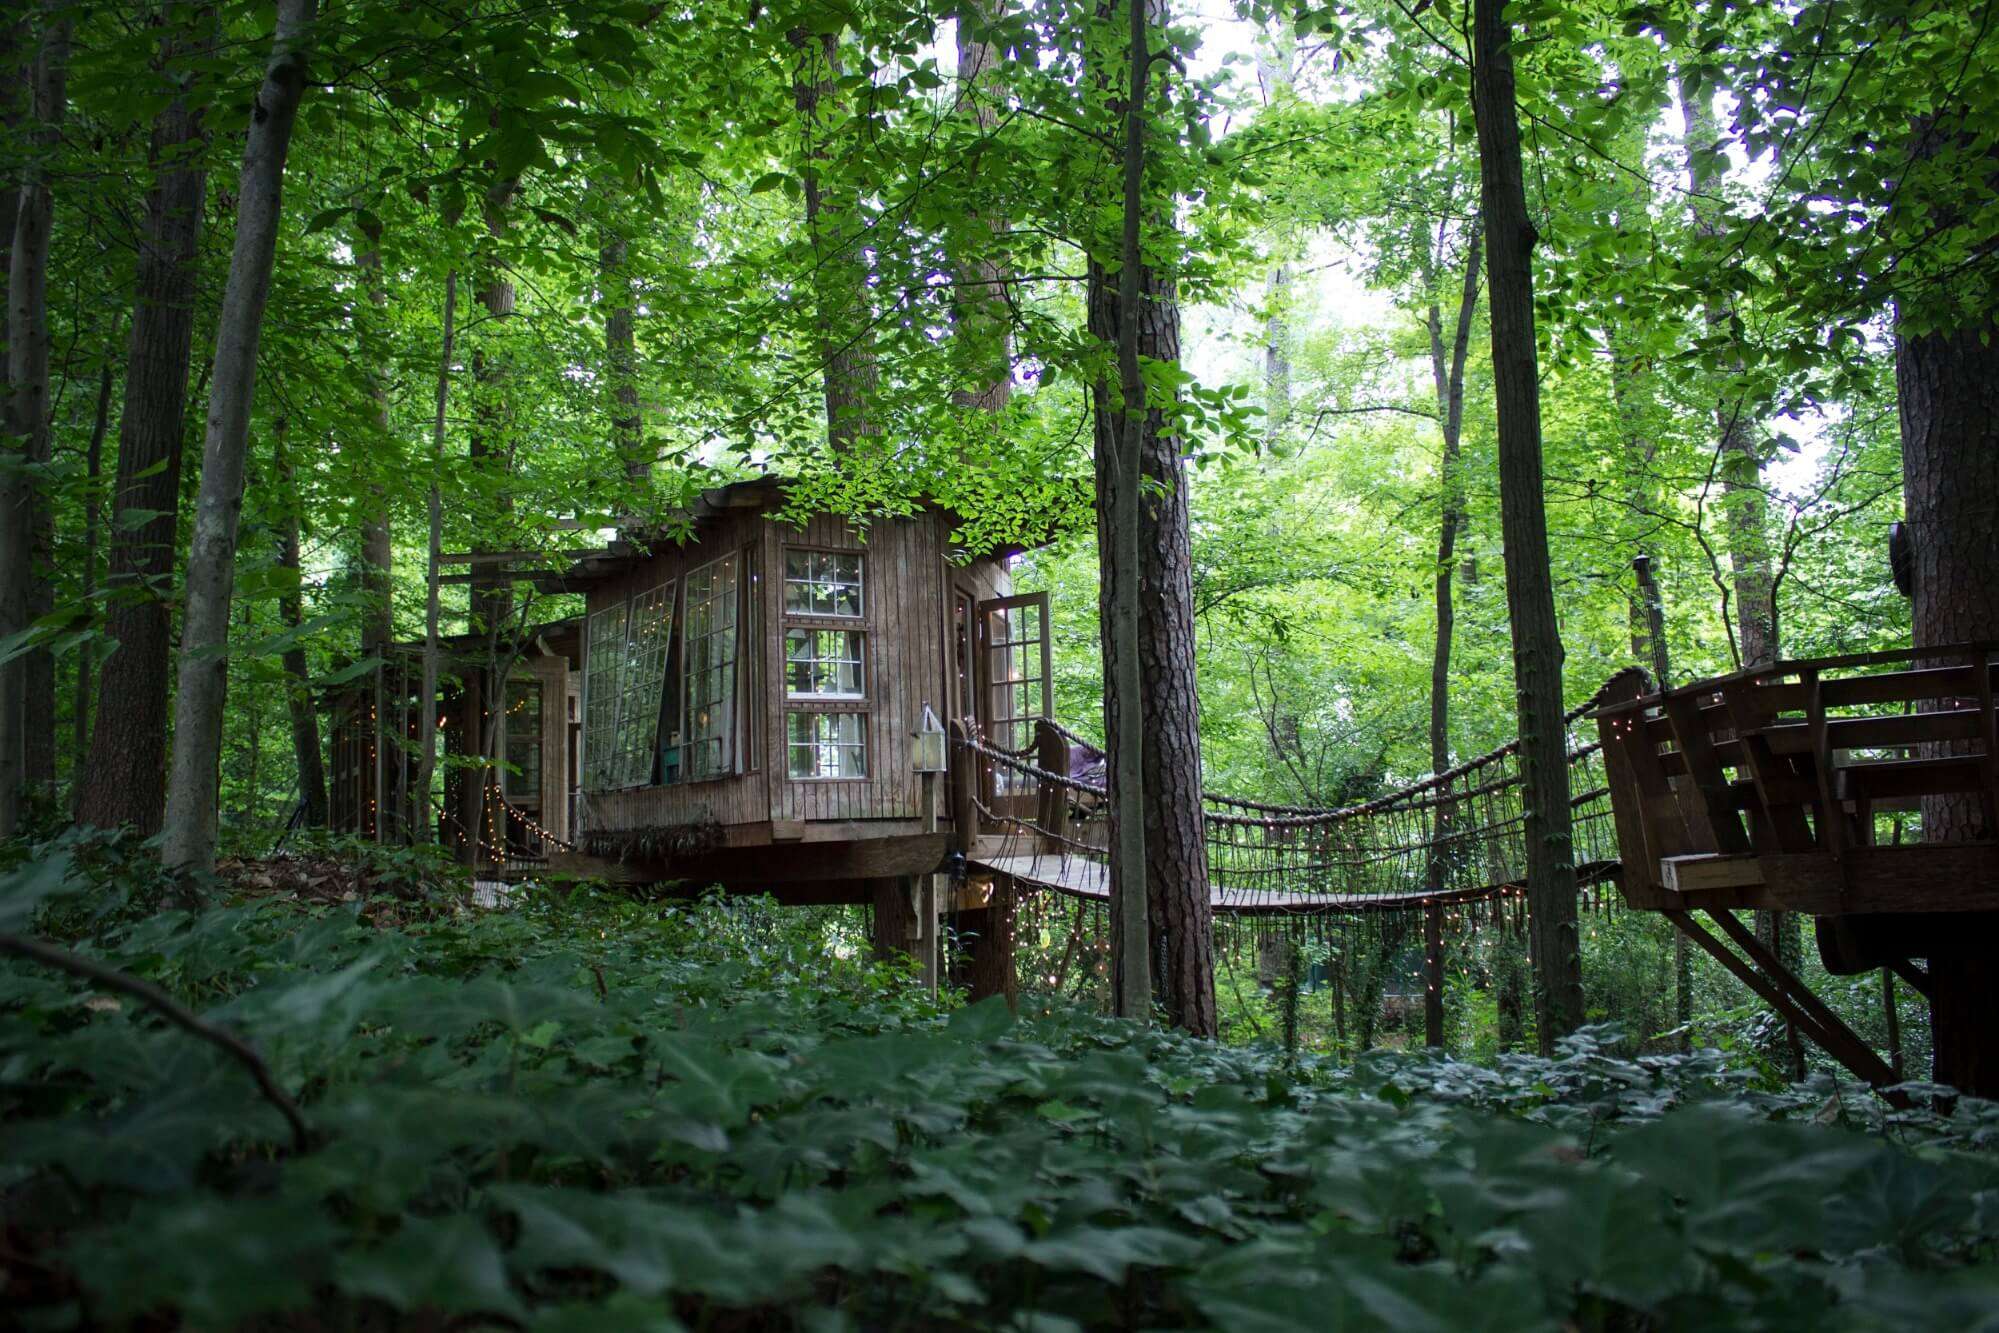 An exterior view of the secluded treehouse in Georgia nestled in forest